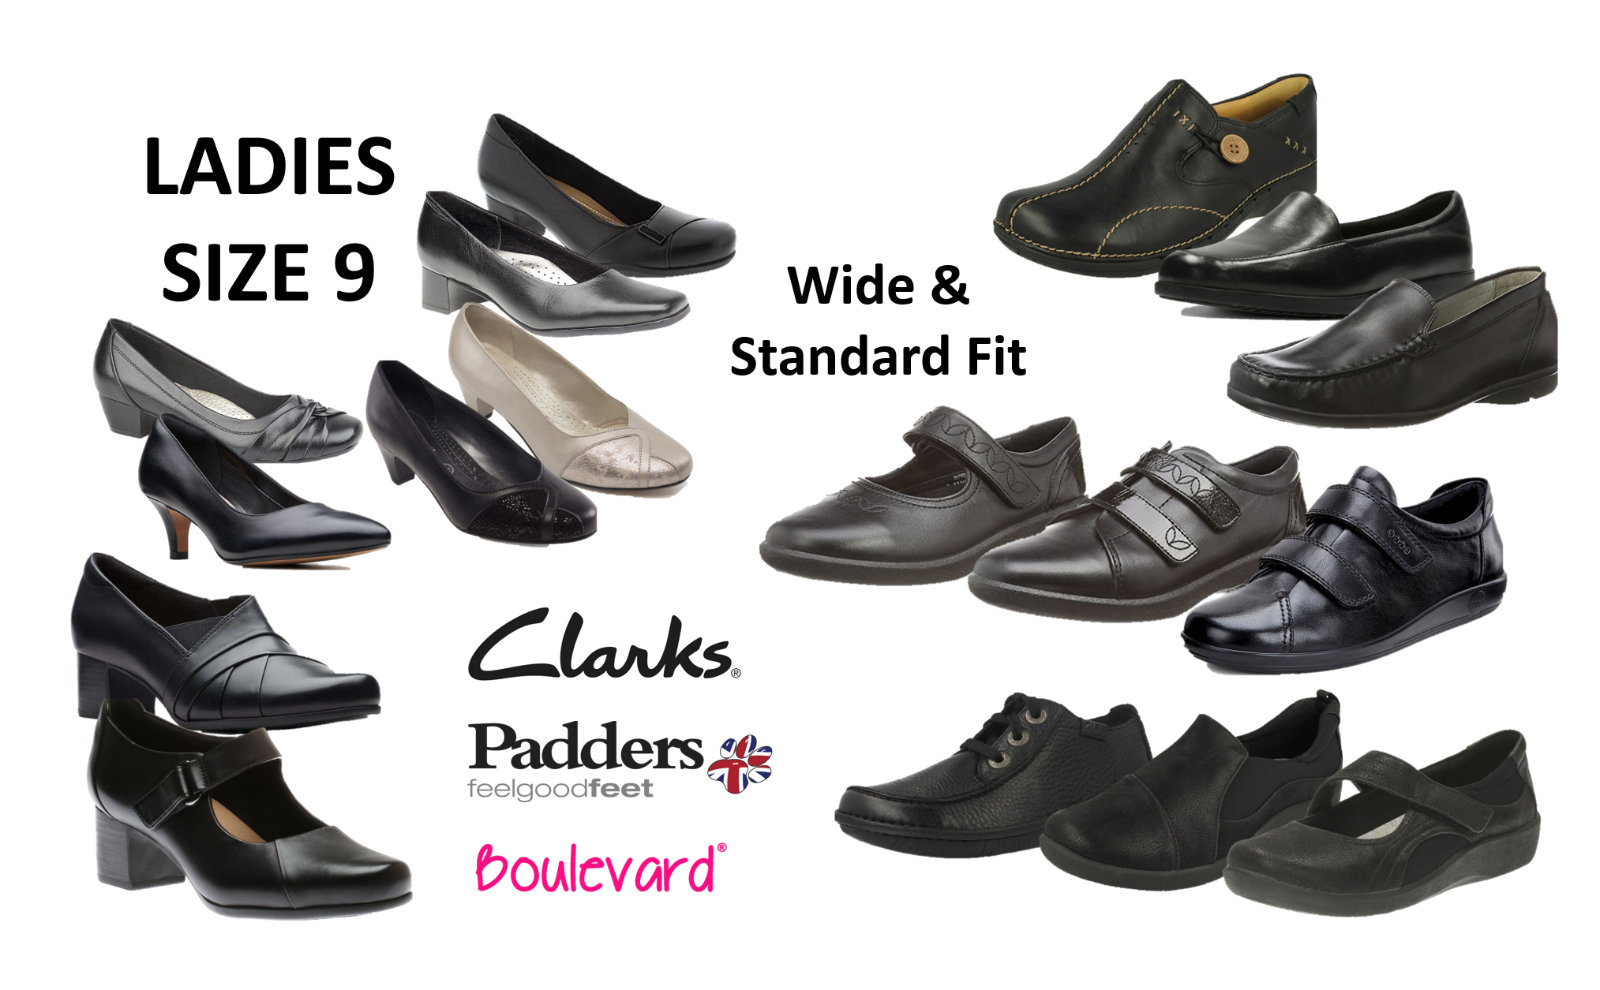 Ladies SIZE 9 San Francisco Mall Shoes Mix Of Extra Dr 5 ☆ very popular Clarks Padders Keller Styles